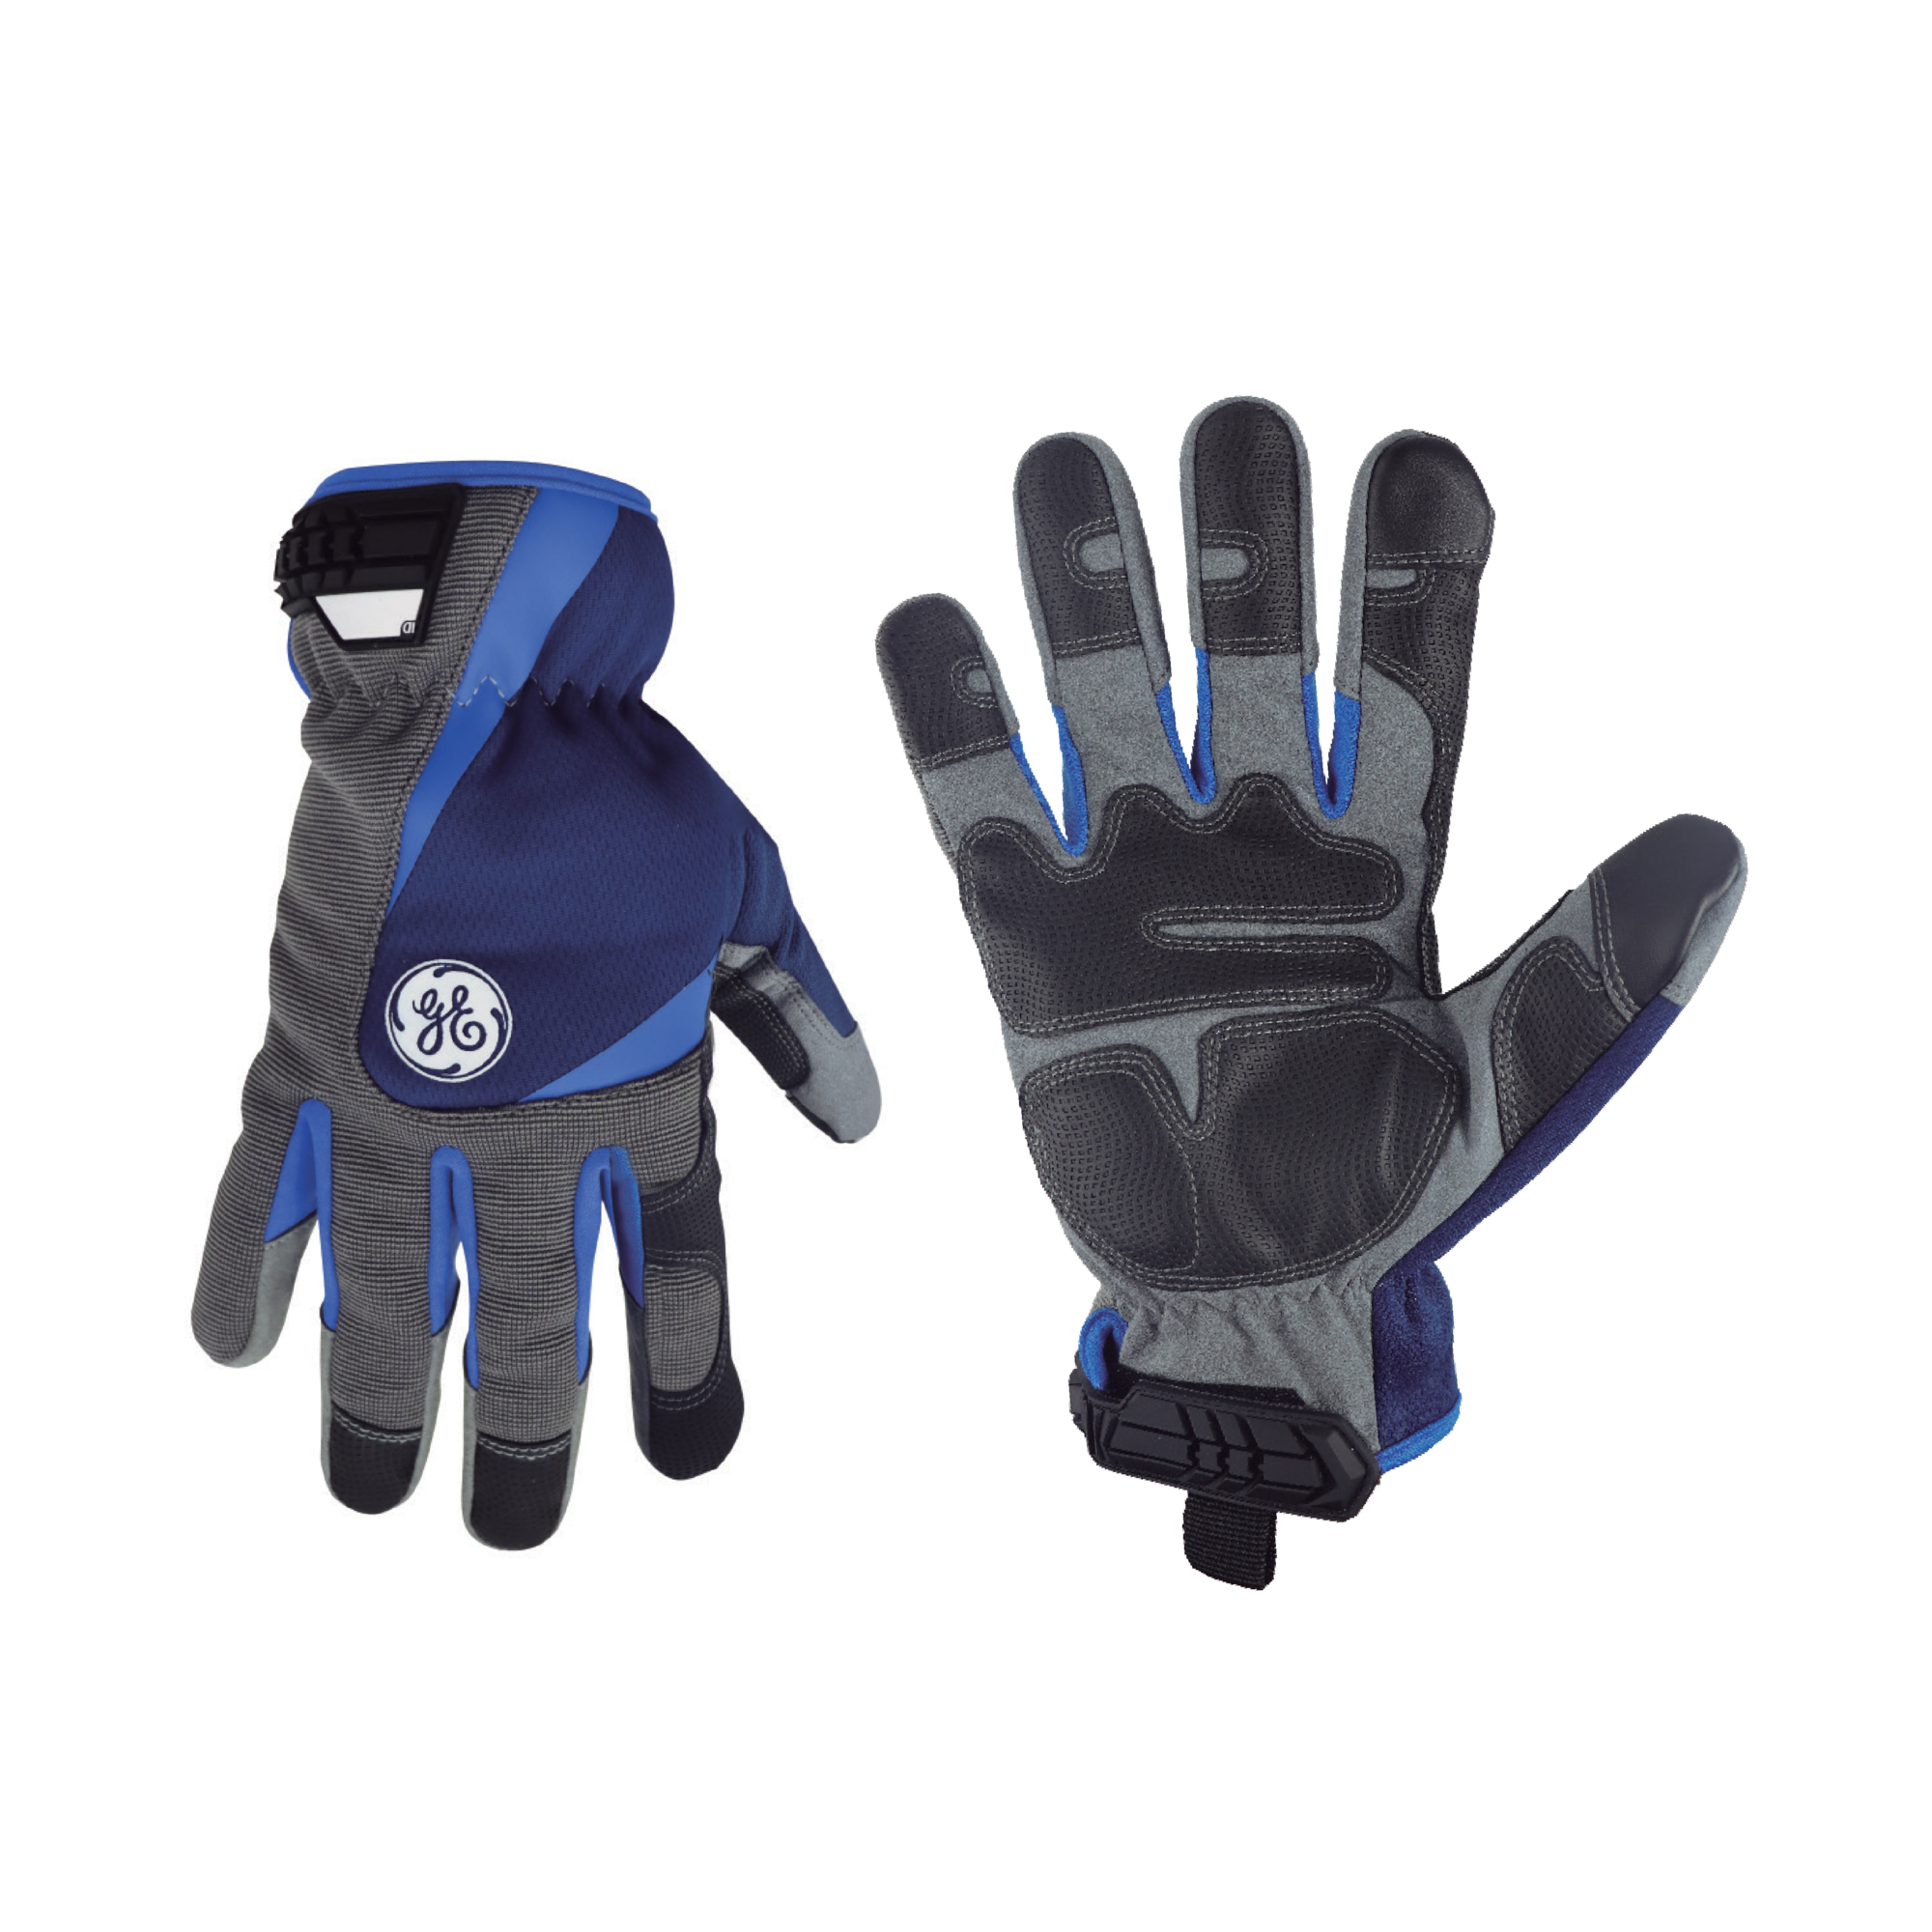 General Electric, Mechanic's Glove Multicolor L 1 pair, Size L, Included (qty.) 1, Model GG411LC